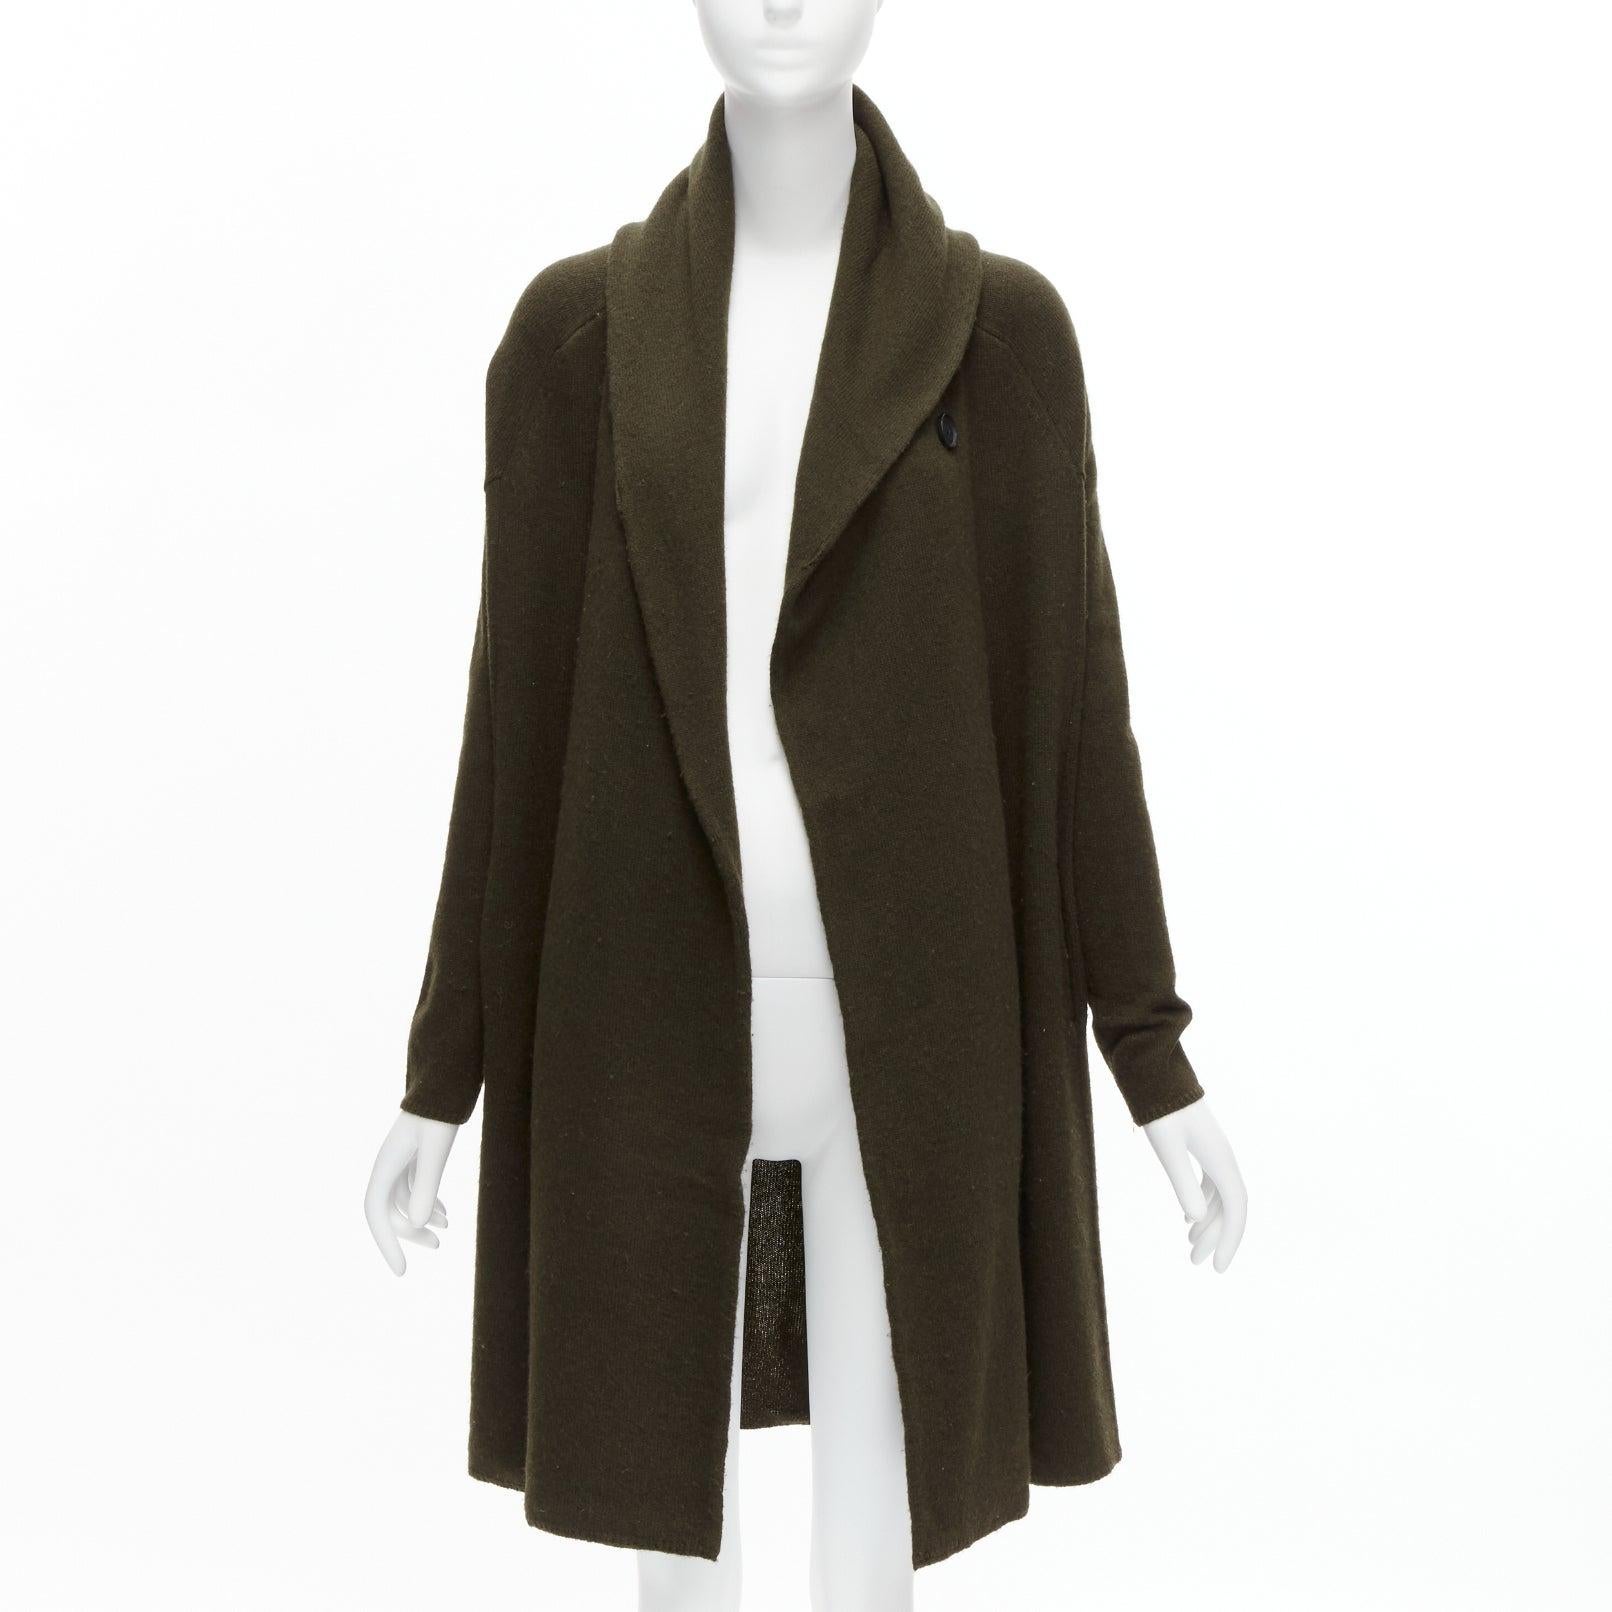 VINCE army green yak wool shawl neck single button wrap cardigan coat XXS
Reference: SNKO/A00267
Brand: Vince
Material: Wool
Color: Green
Pattern: Solid
Closure: Button
Extra Details: Single button closure. Wrap shawl collar. Leather patch at back